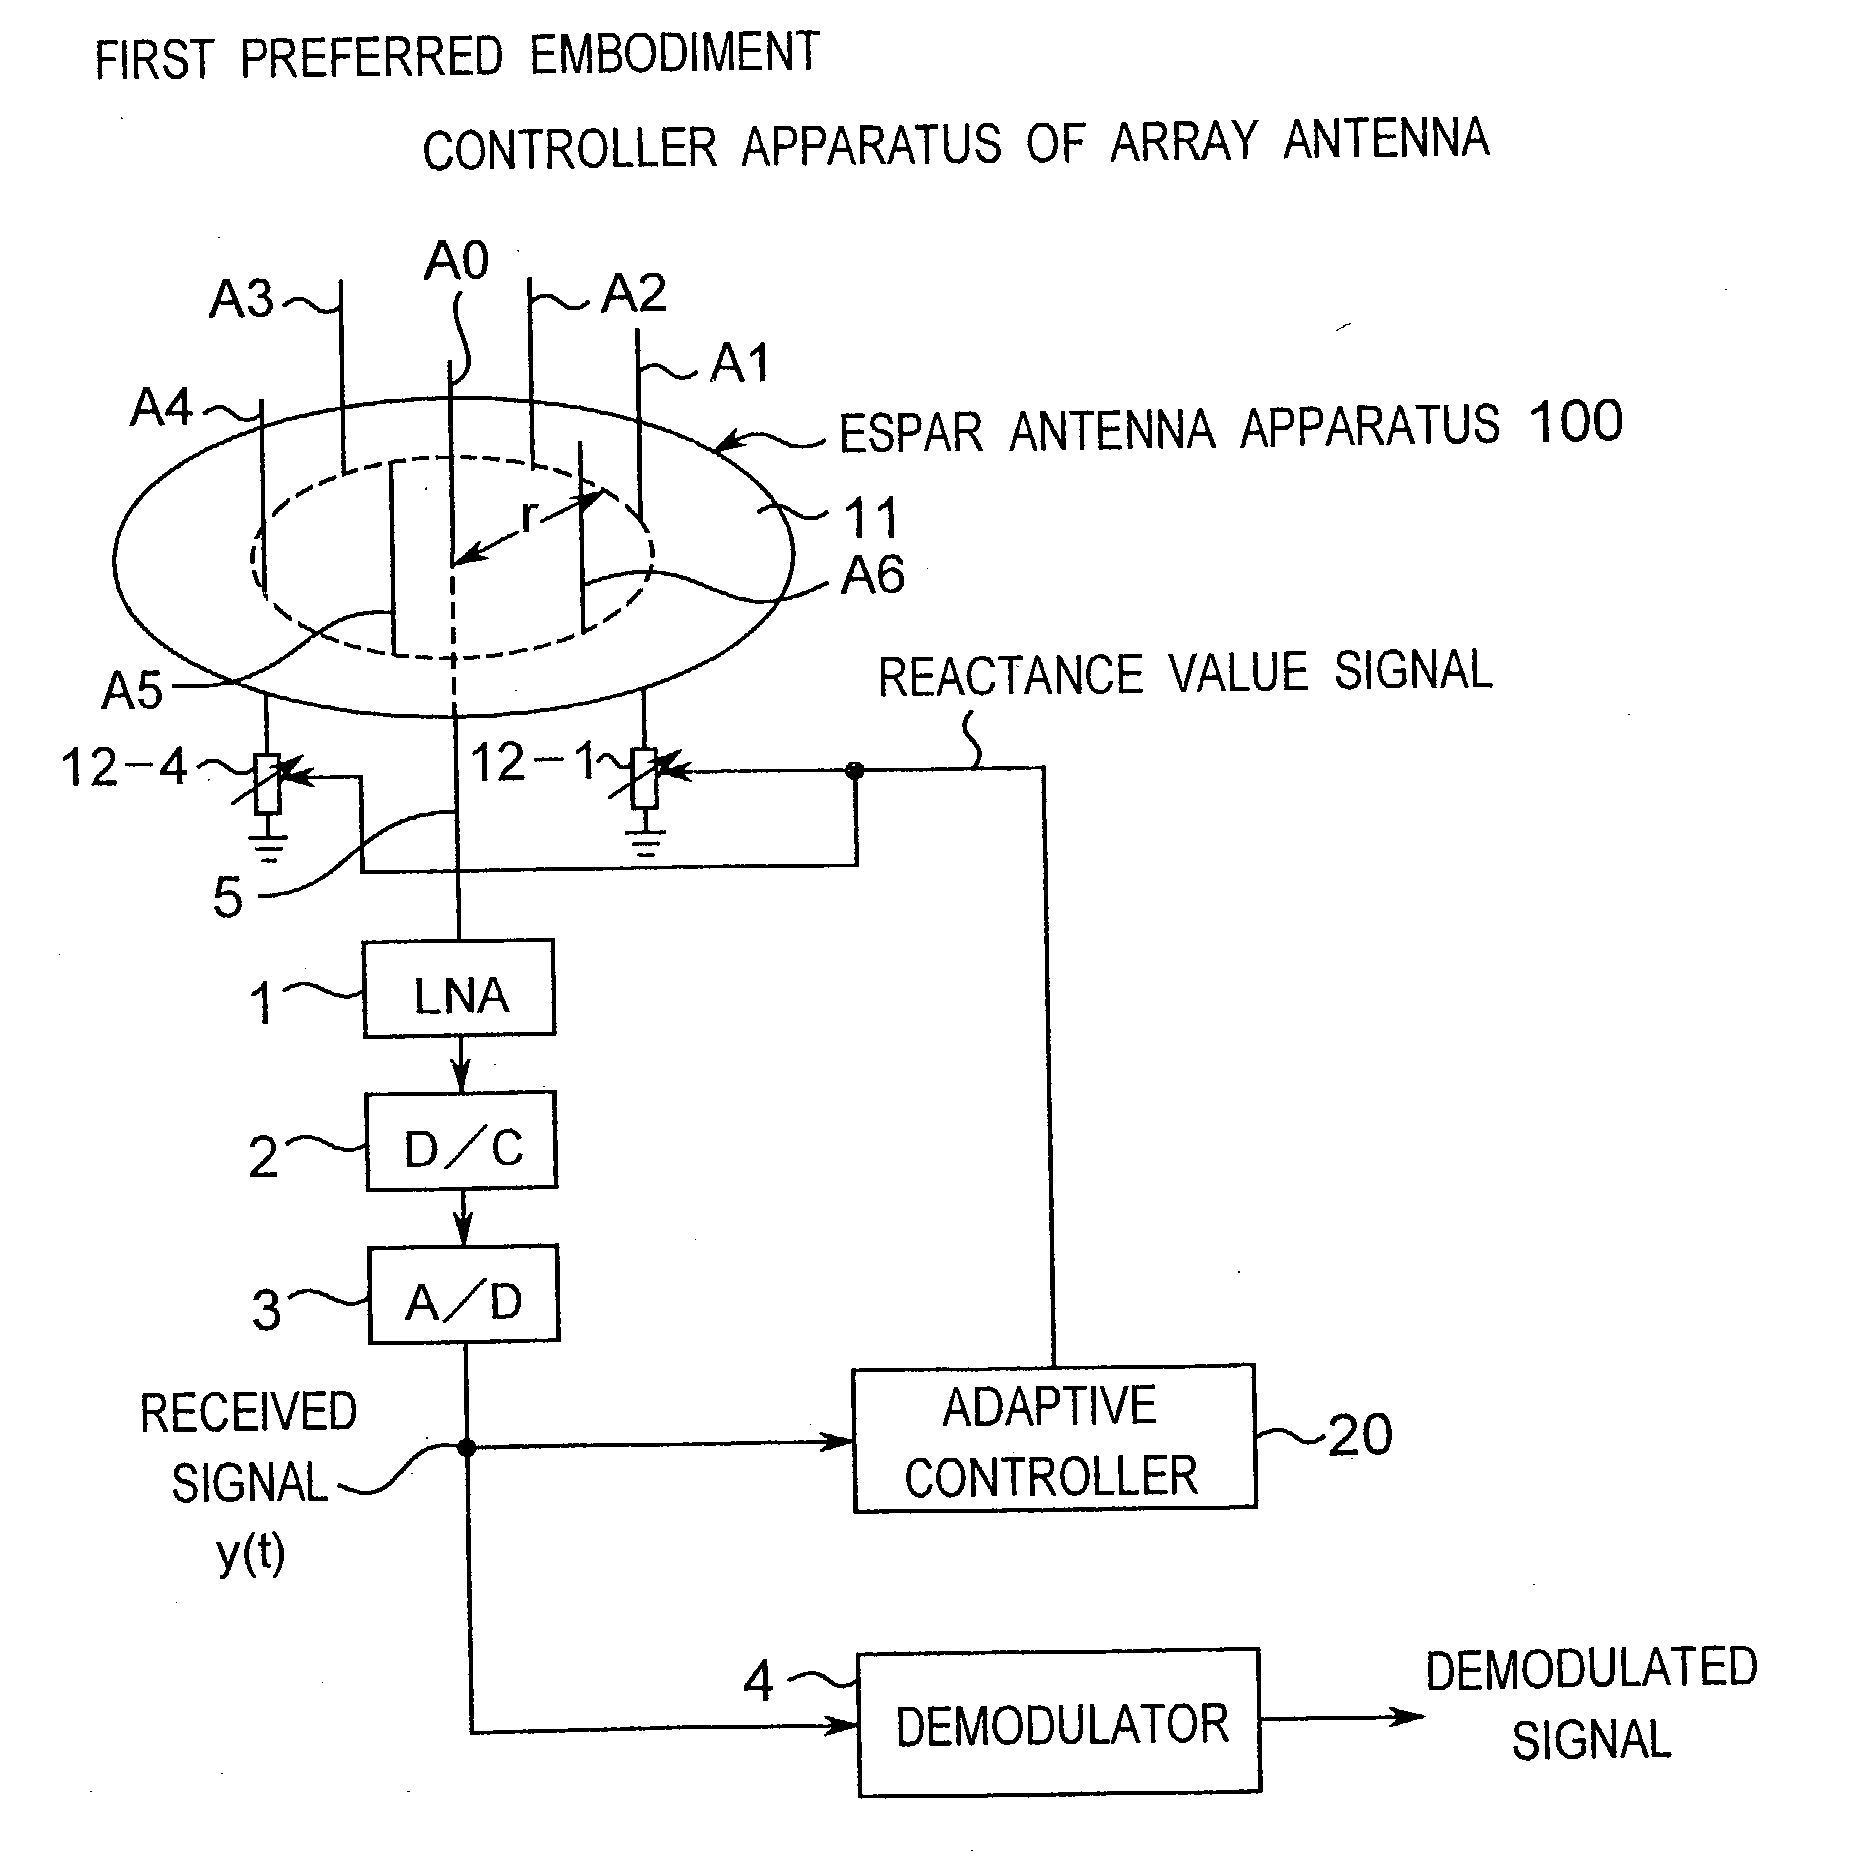 Method for controlling array antenna equipped with a plurality of antenna elements, method for calculating signal to noise ratio of received signal, and method for adaptively controlling radio receiver